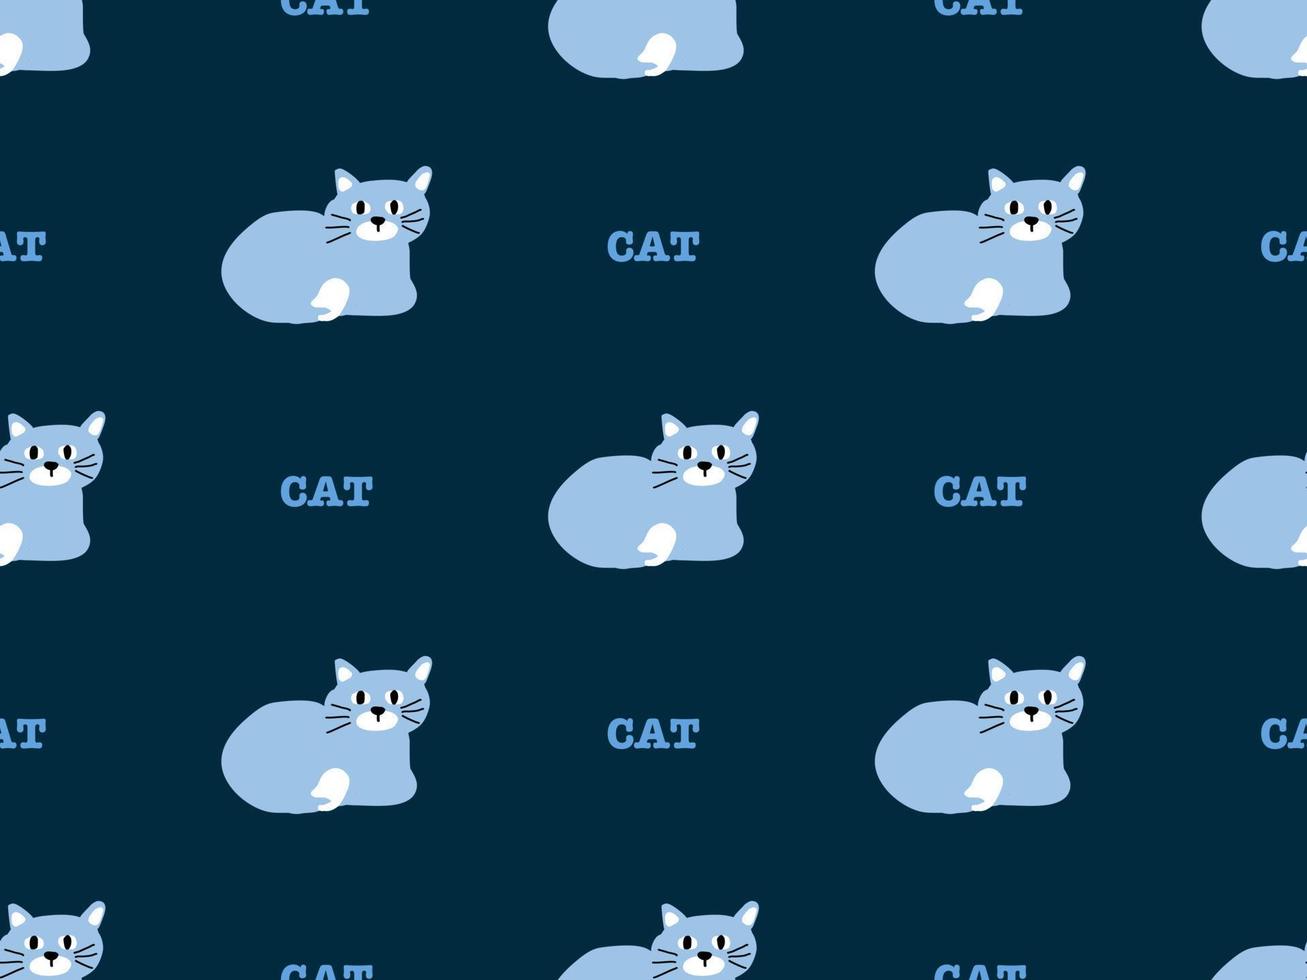 Cat cartoon character seamless pattern on blue background. vector